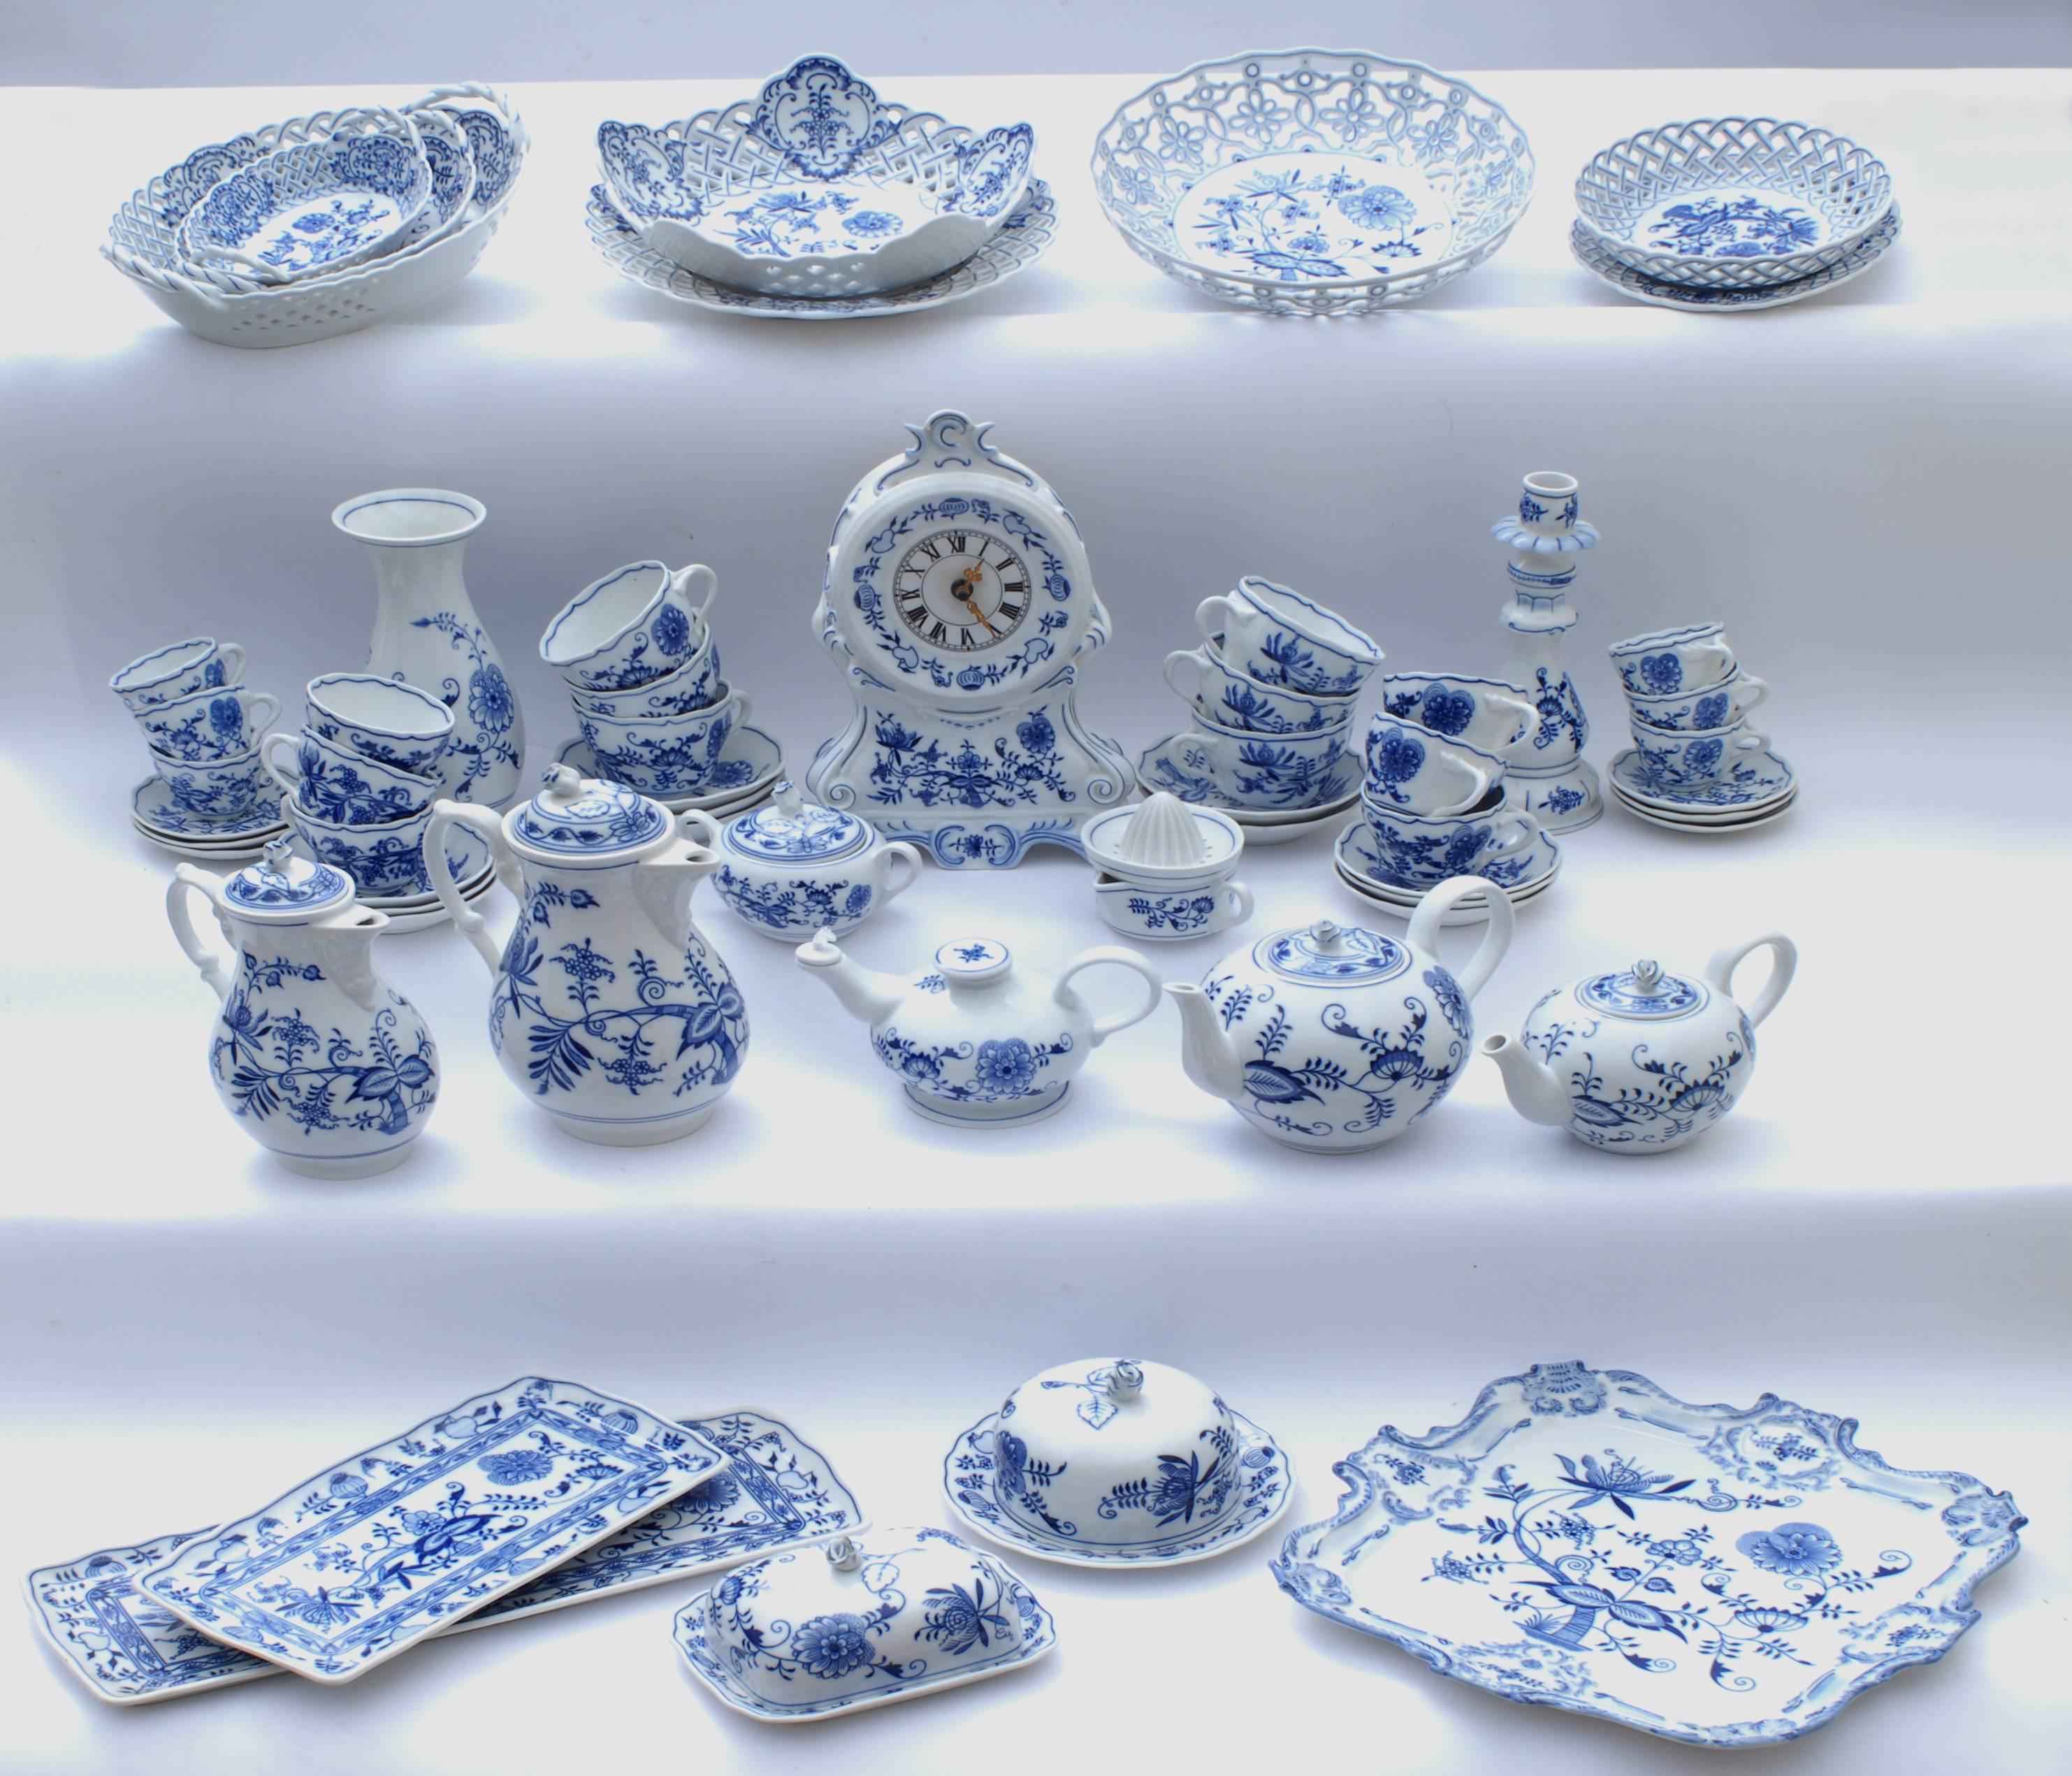 Mid-Century Modern Exceptional 305 Pieces Meissen and Bohemia Zwiebelmuster Porcelain Set 1885-1992